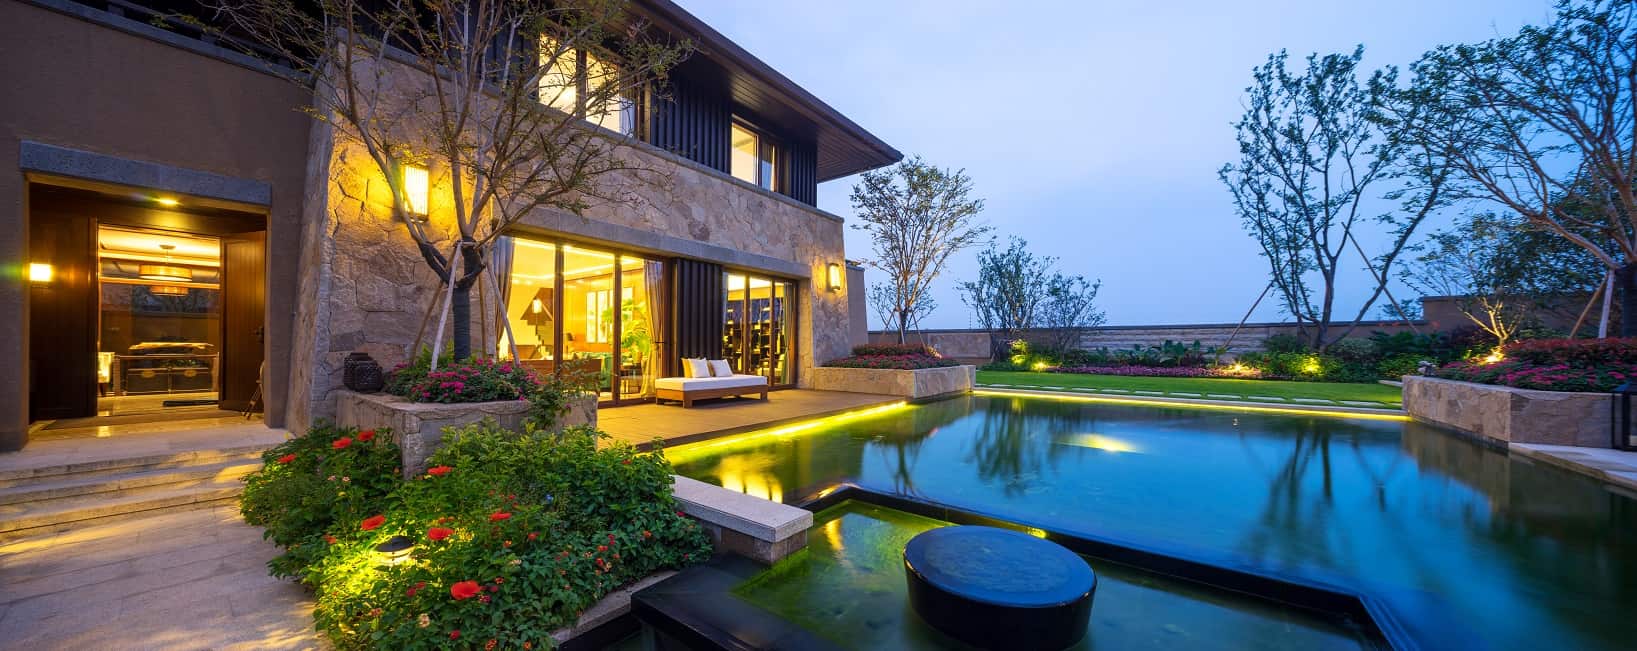 15 Outside Lighting Ideas To Brighten Your Home. Great ultramodern exterior design of the stone cladded house and masterfully arranged area with LED-lighted pool